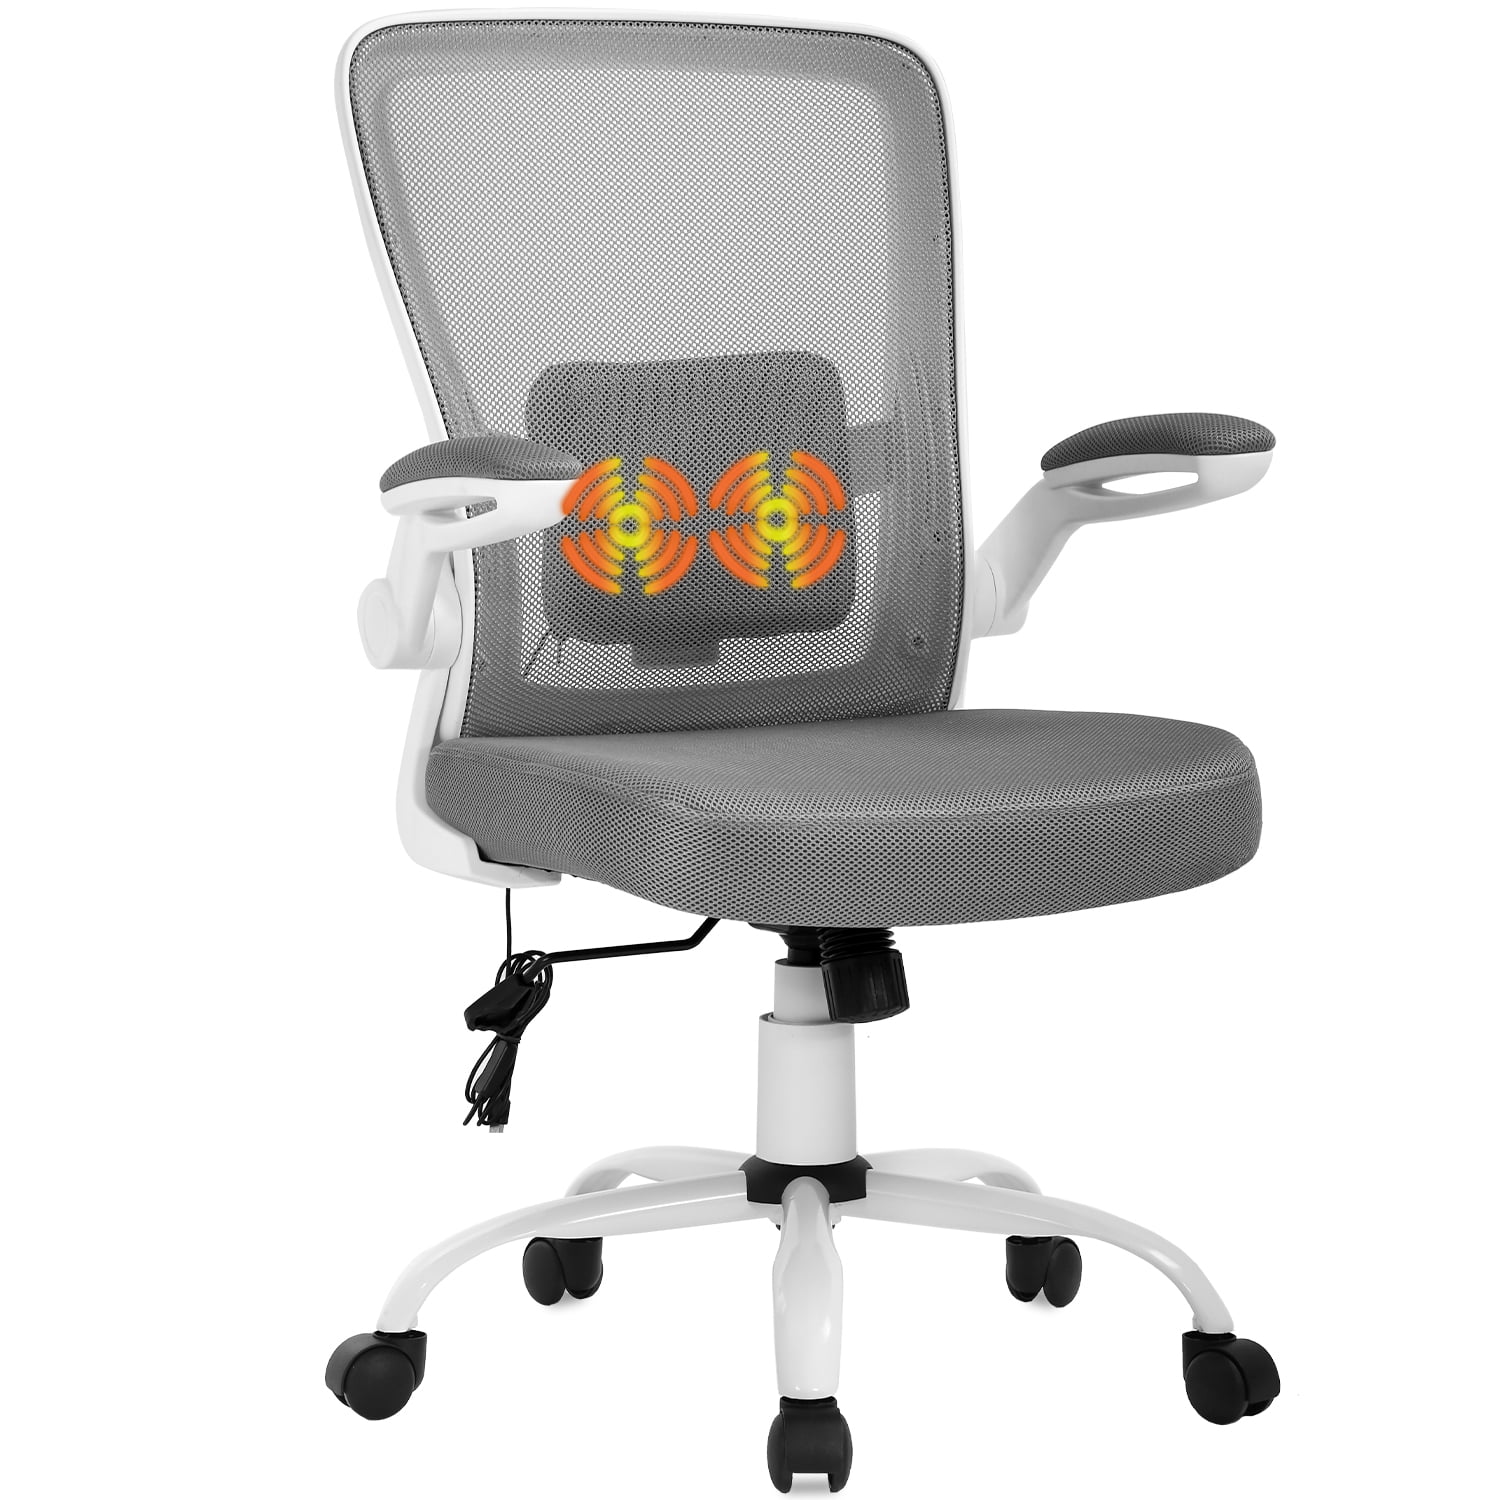 Details about   Office Chair,Ergonomic PU Desk Task Executive Chair Rolling Swivel Adjustable 